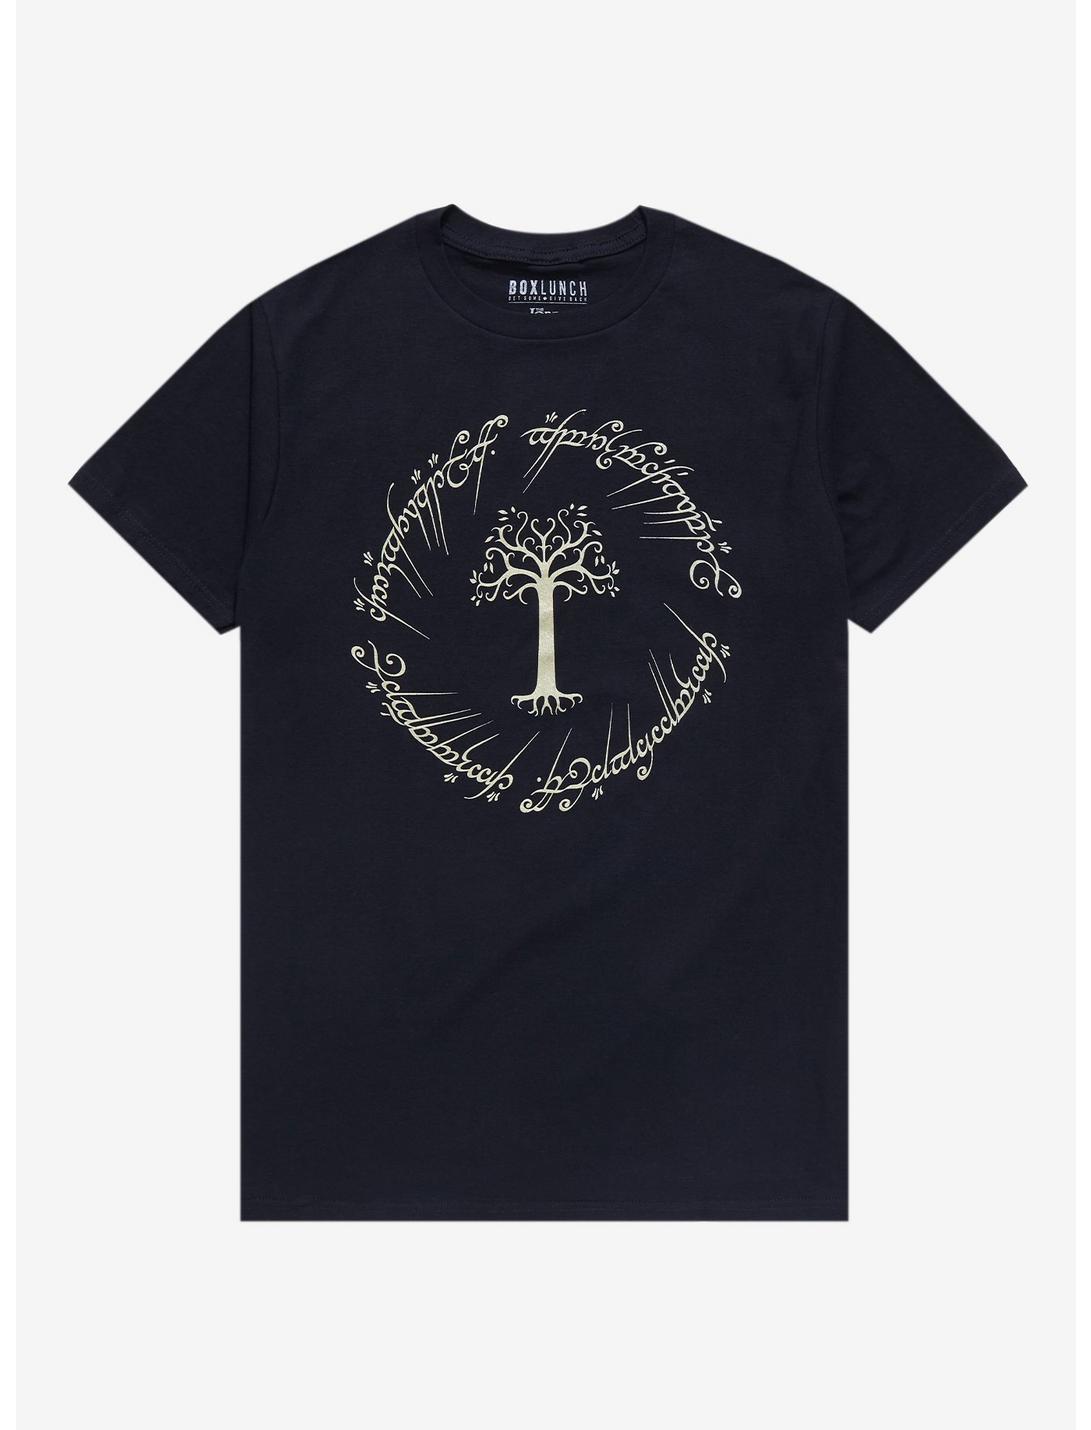 The Lord of the Rings Tree of Gondor T-Shirt - BoxLunch Exclusive, BLACK, hi-res